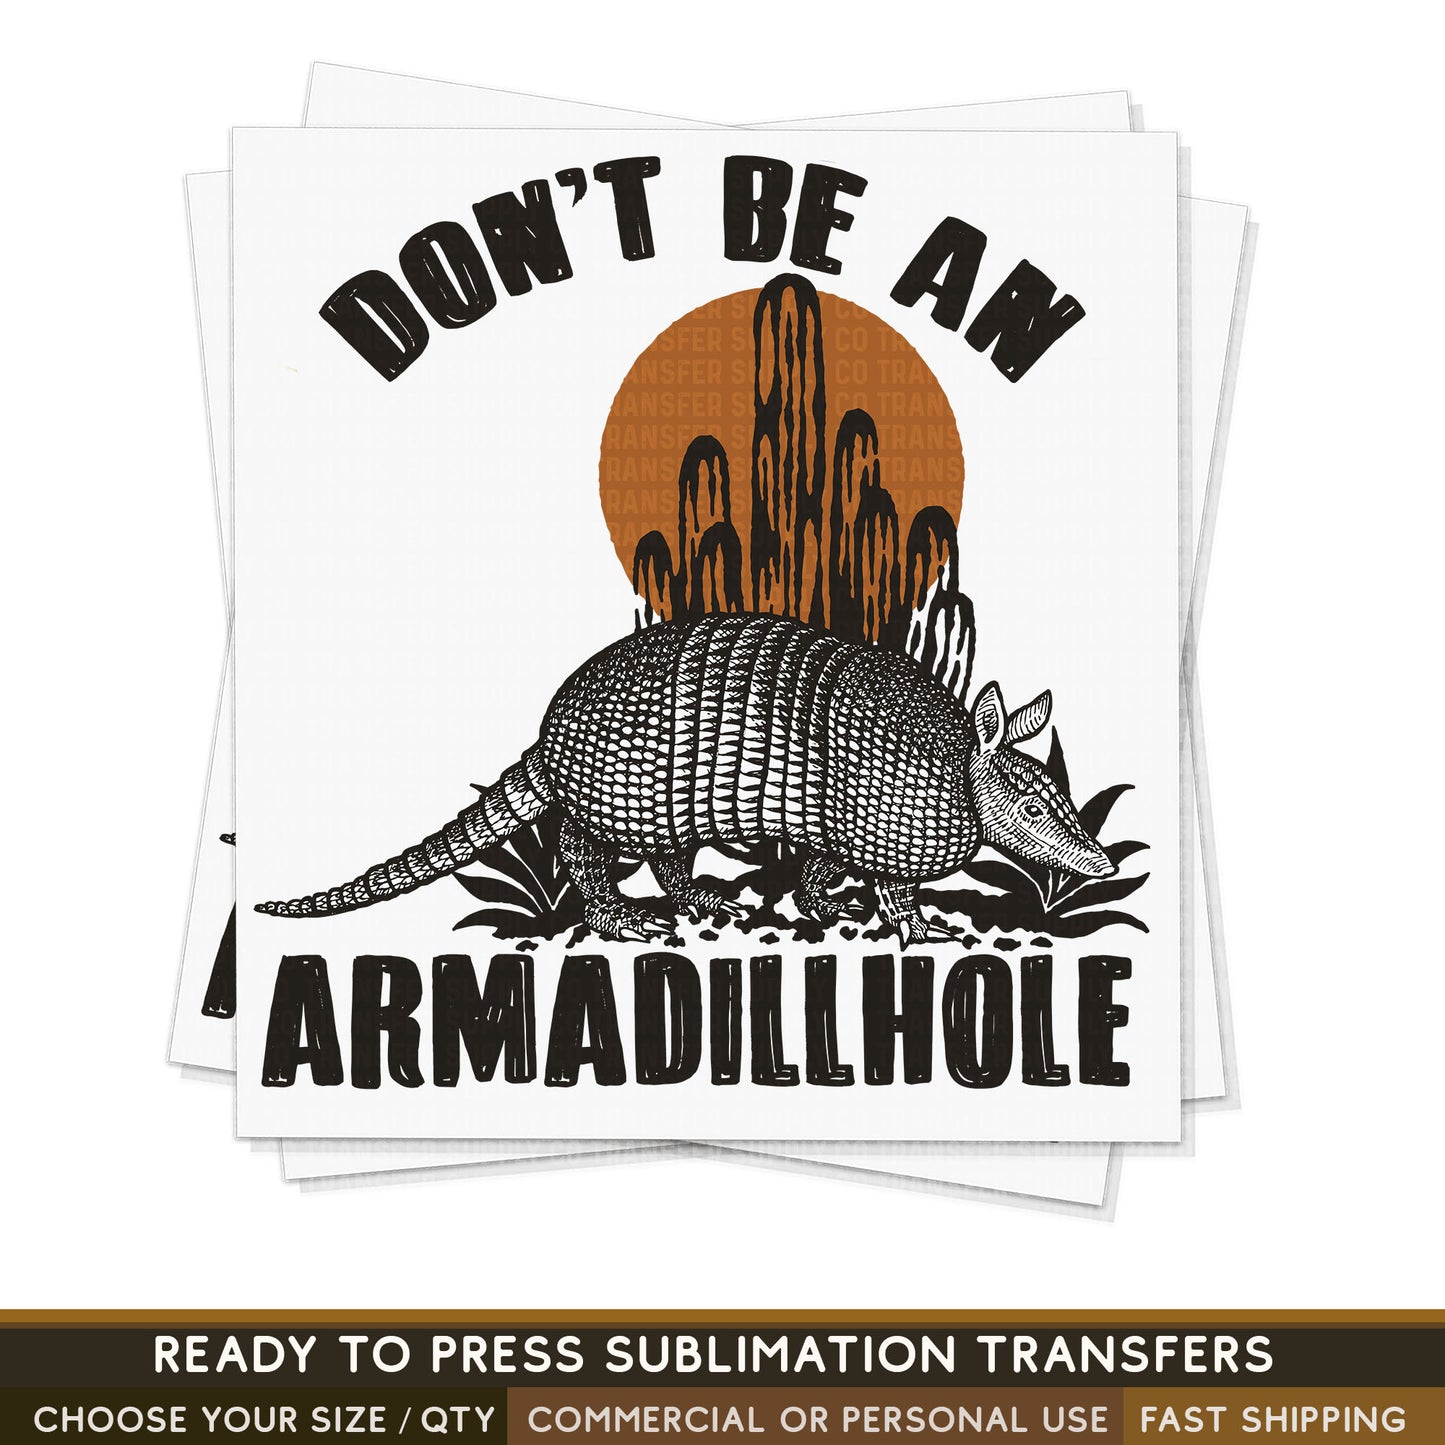 Don't Be An ArmaDILLHOLE Sublimation Transfer, Western Ready To Press Sublimation Transfers, Ready To Press Transfers, Sublimation Print